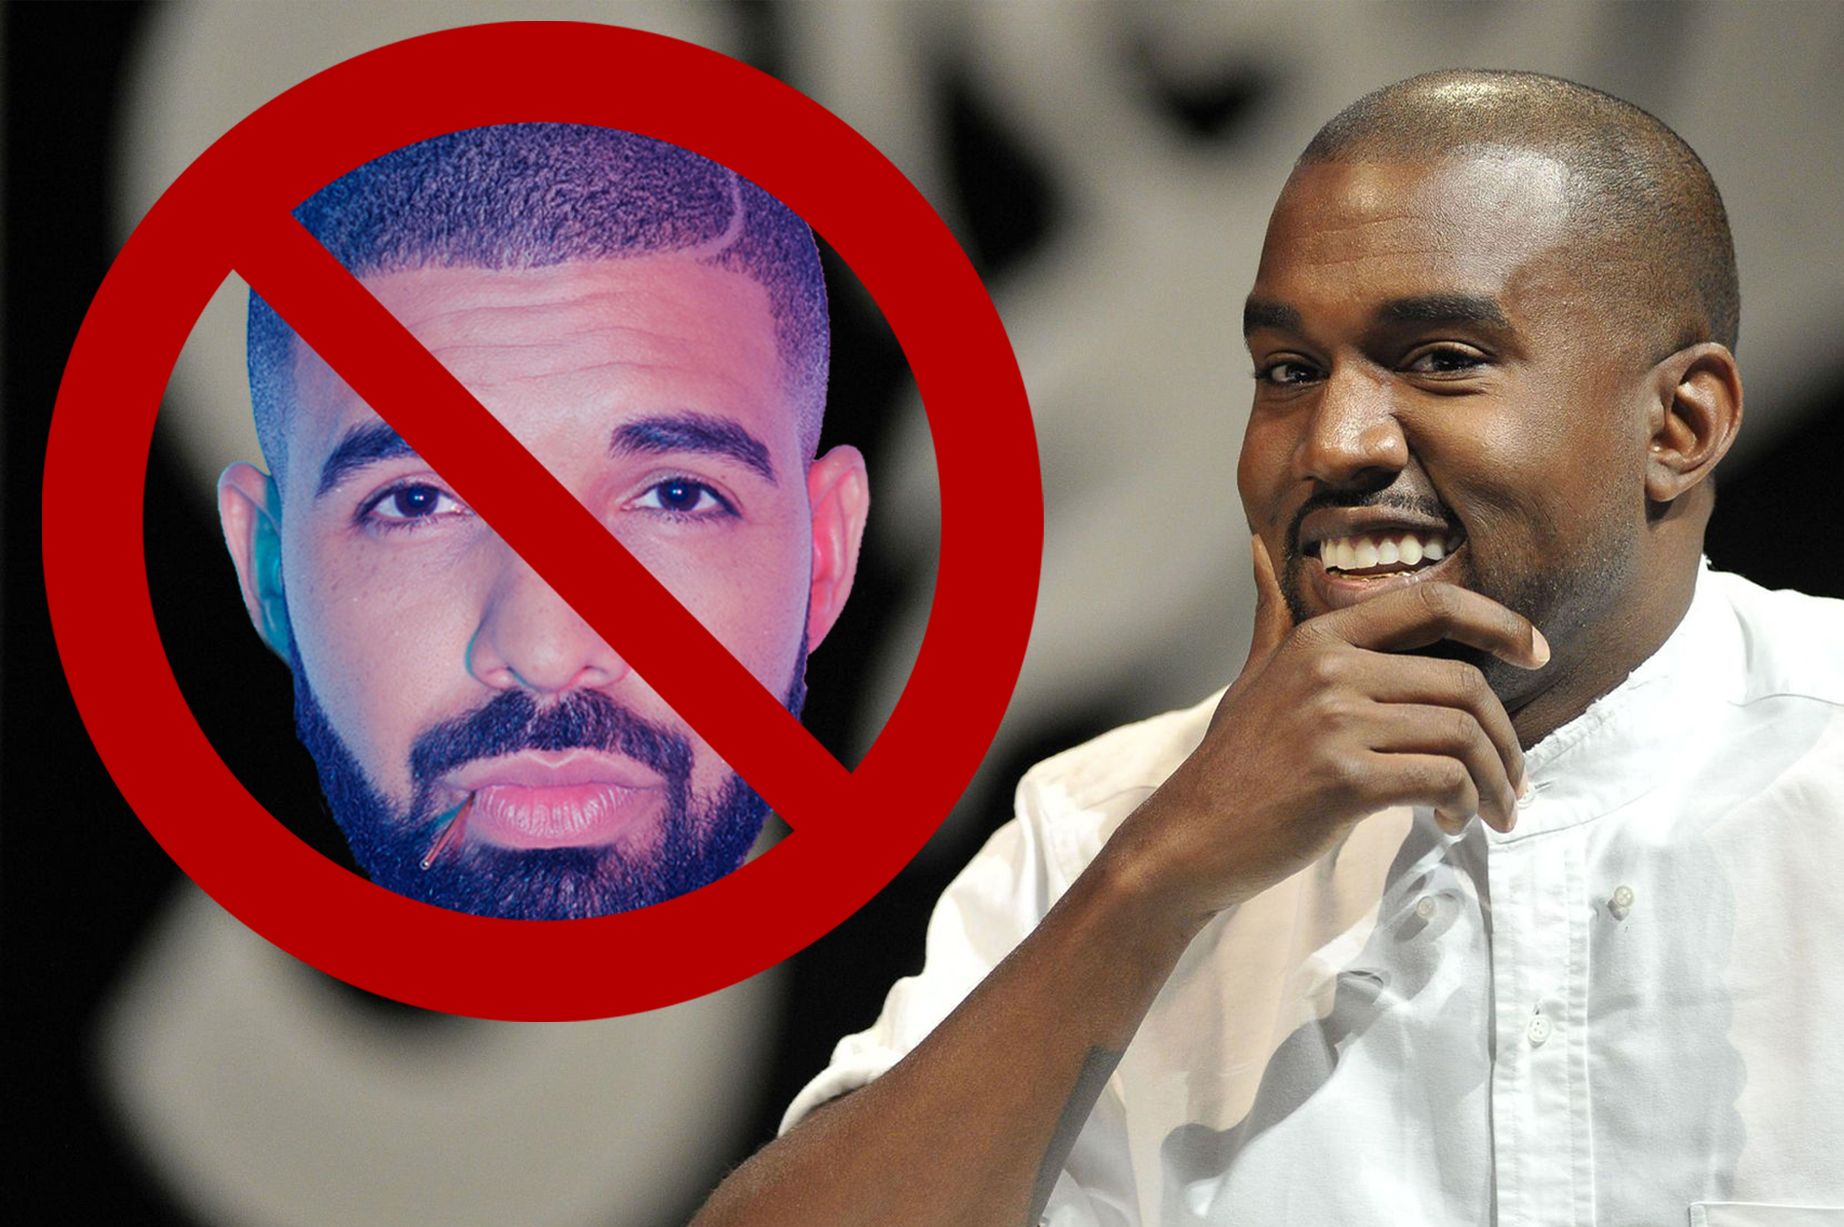 Kanye's New Stem Player Will Not Play Anything By Drake